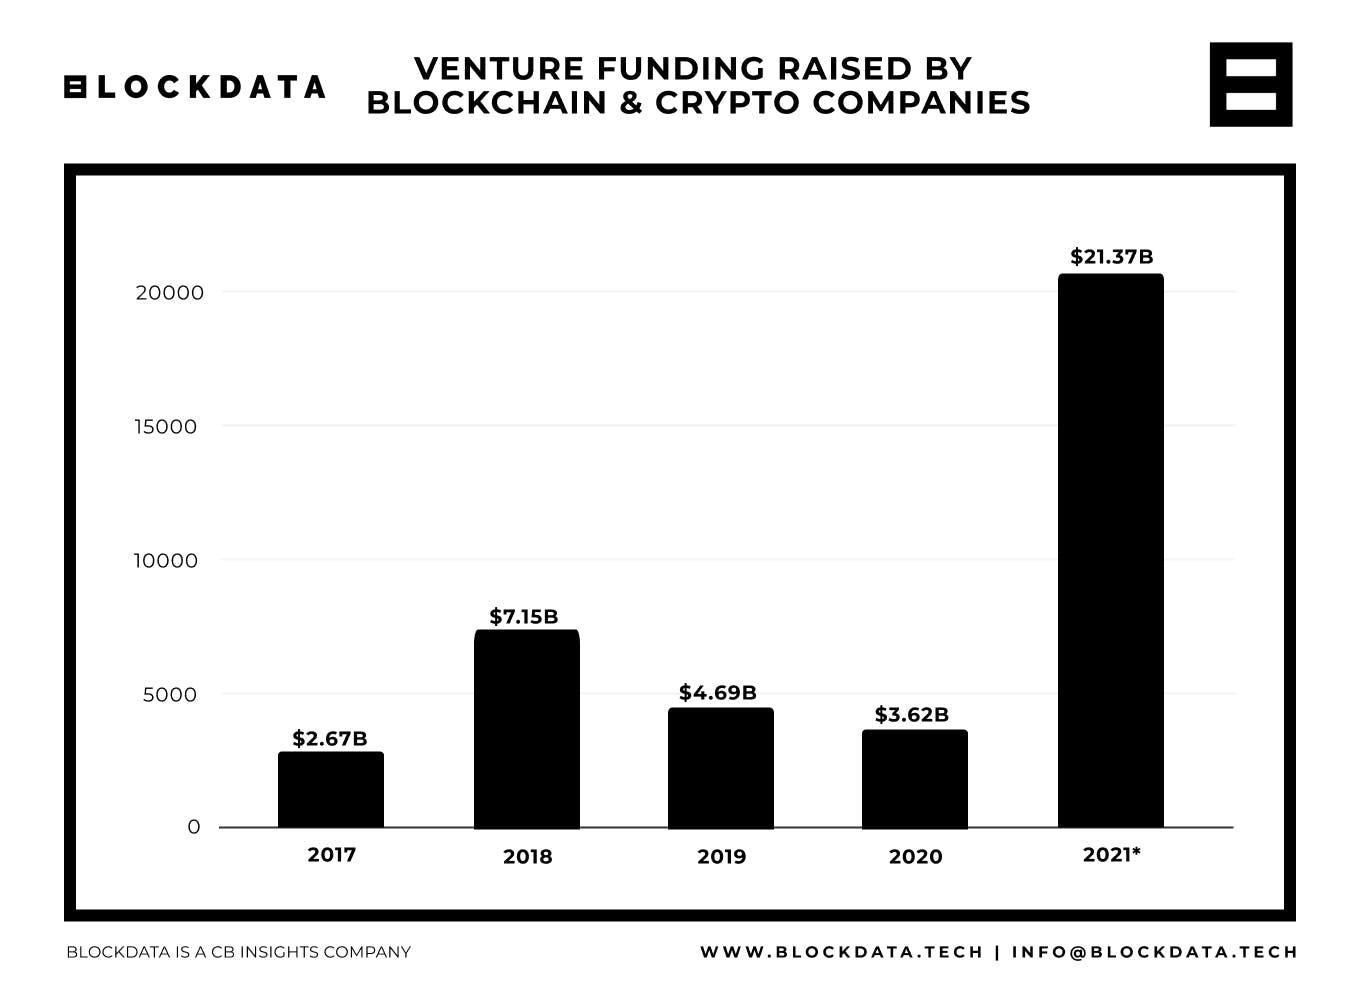 Venture funding raised by blockchain and crypto companies